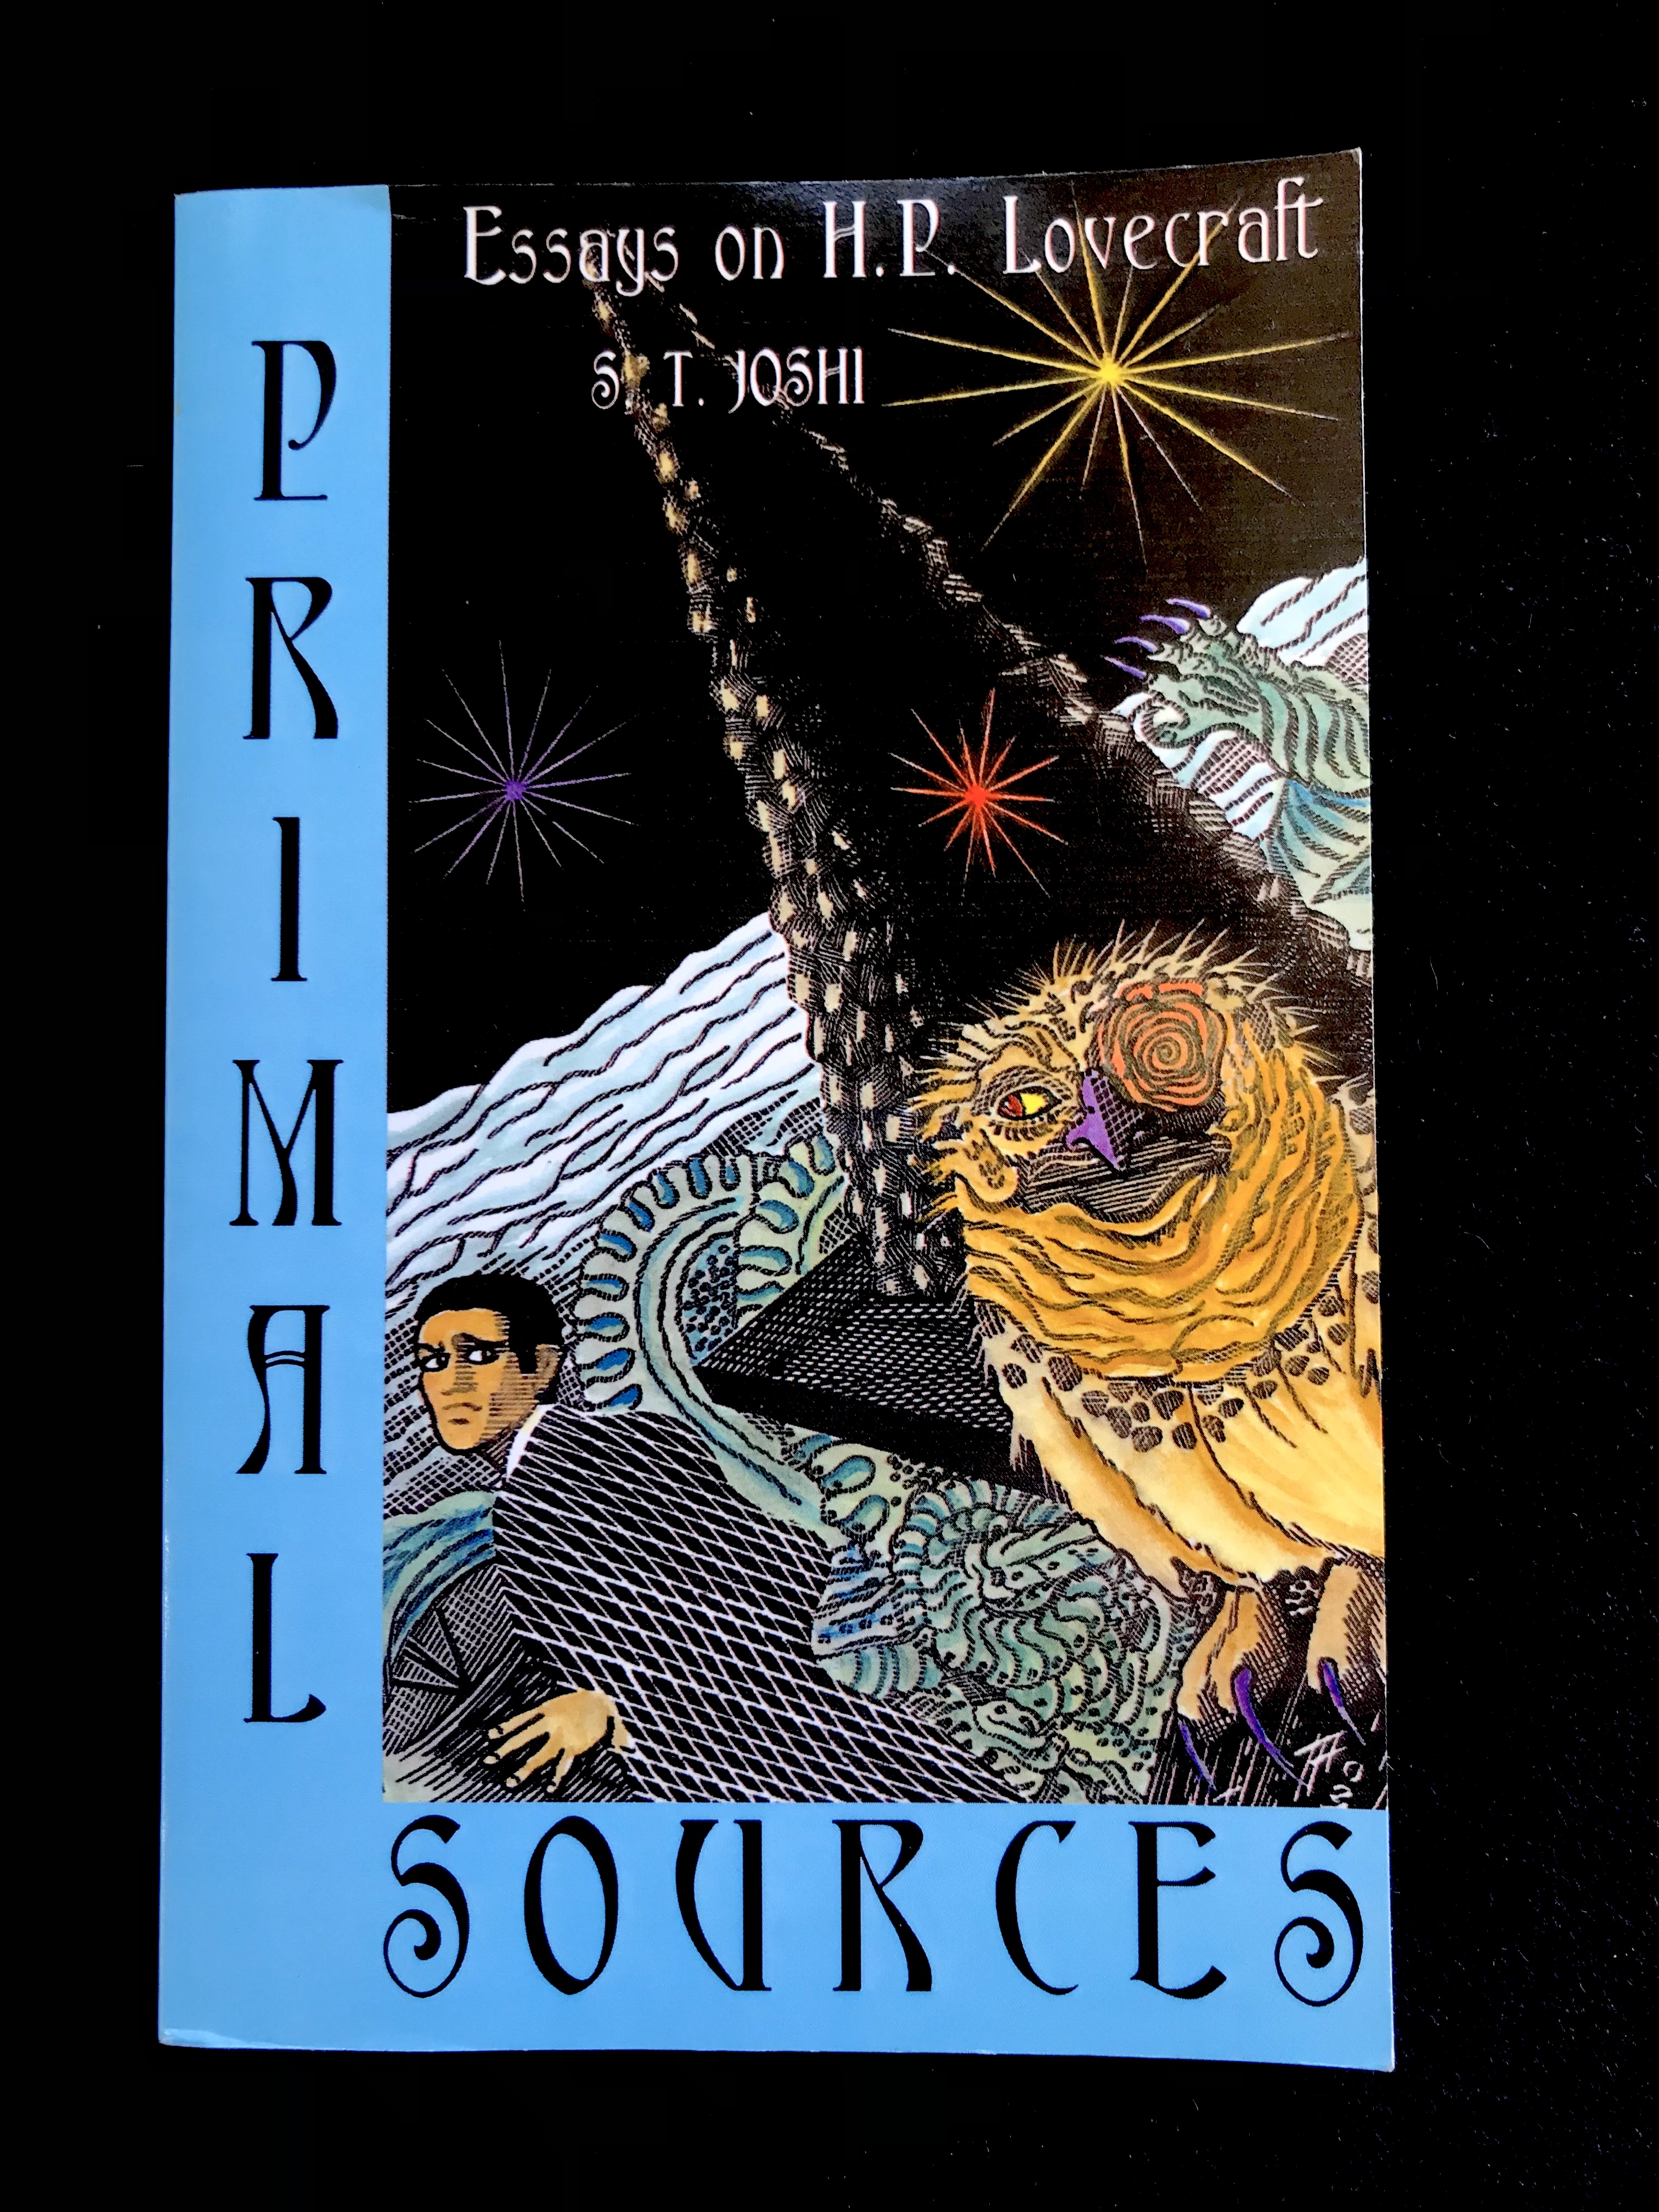 Primal Sources: Essays On H. P. Lovecraft by S. T. Joshi